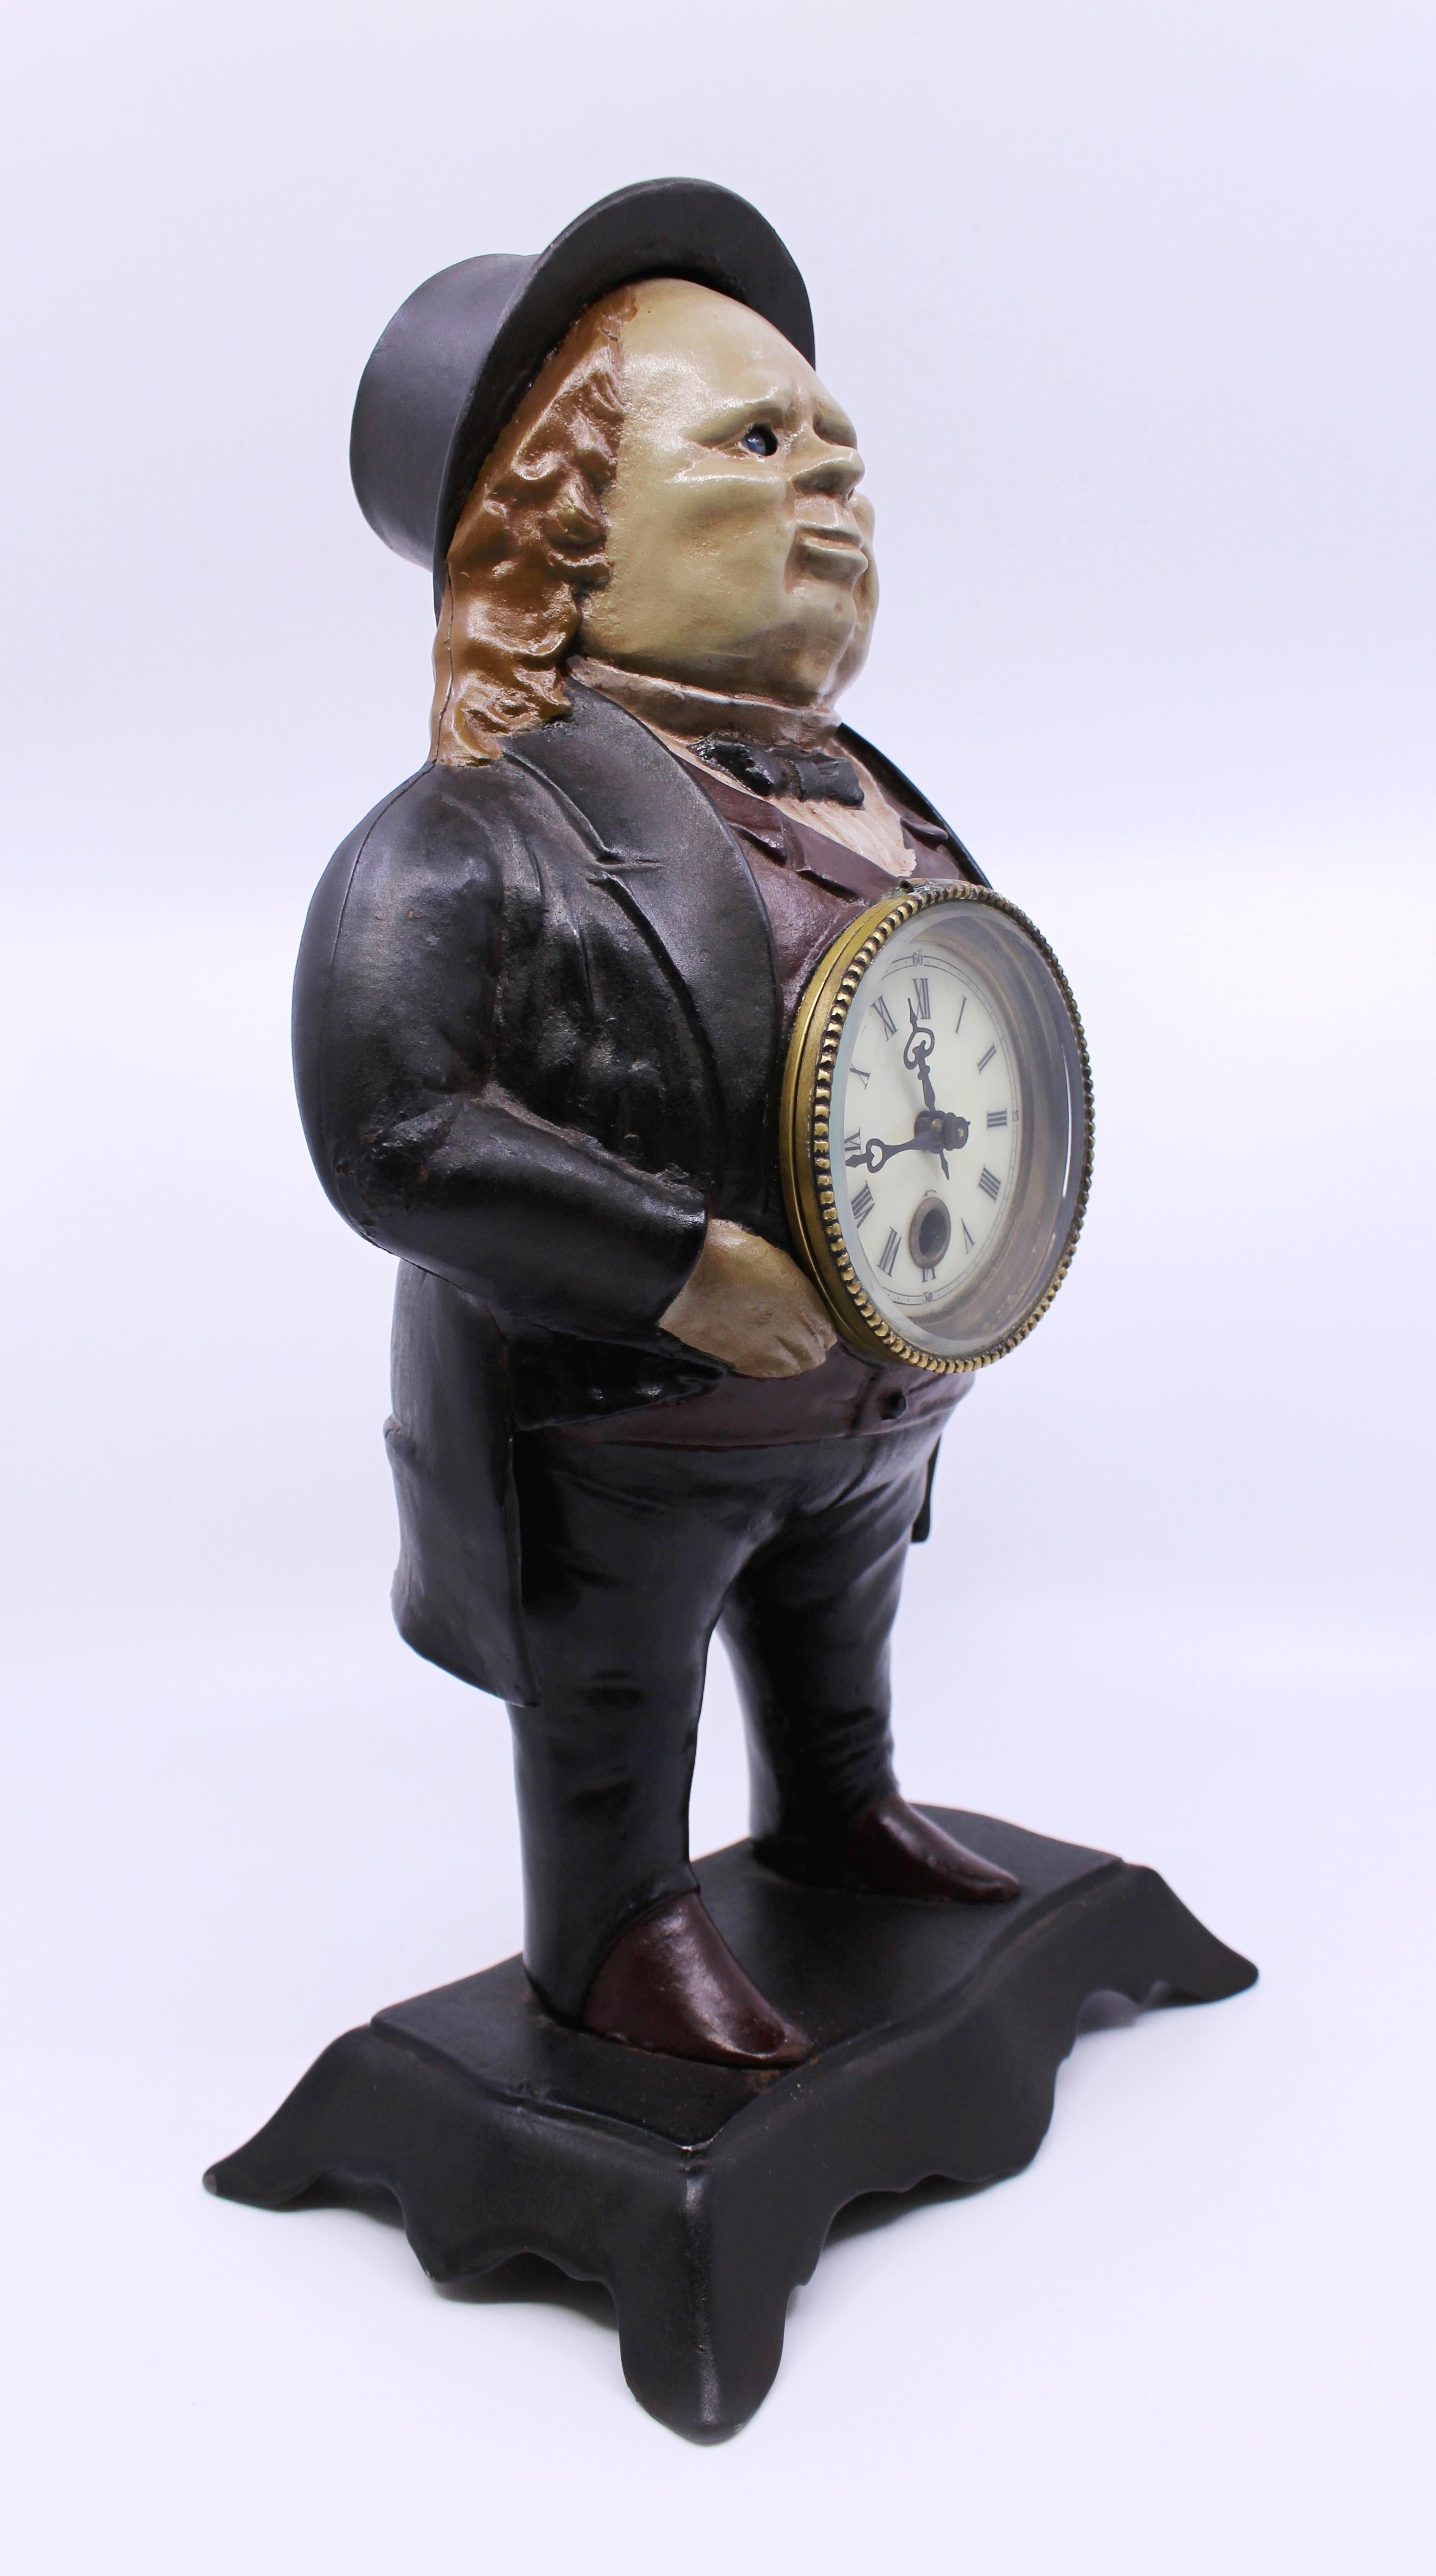 Period 
Antique, late 19th century,

Manufacturer 
Bradley & Hubbard, USA

Decoration 
Enamel dial with hand painted Roman numerals. Blued steel hands, single winding hole with brass outer ring. Cast iron body in the form of John Bull.